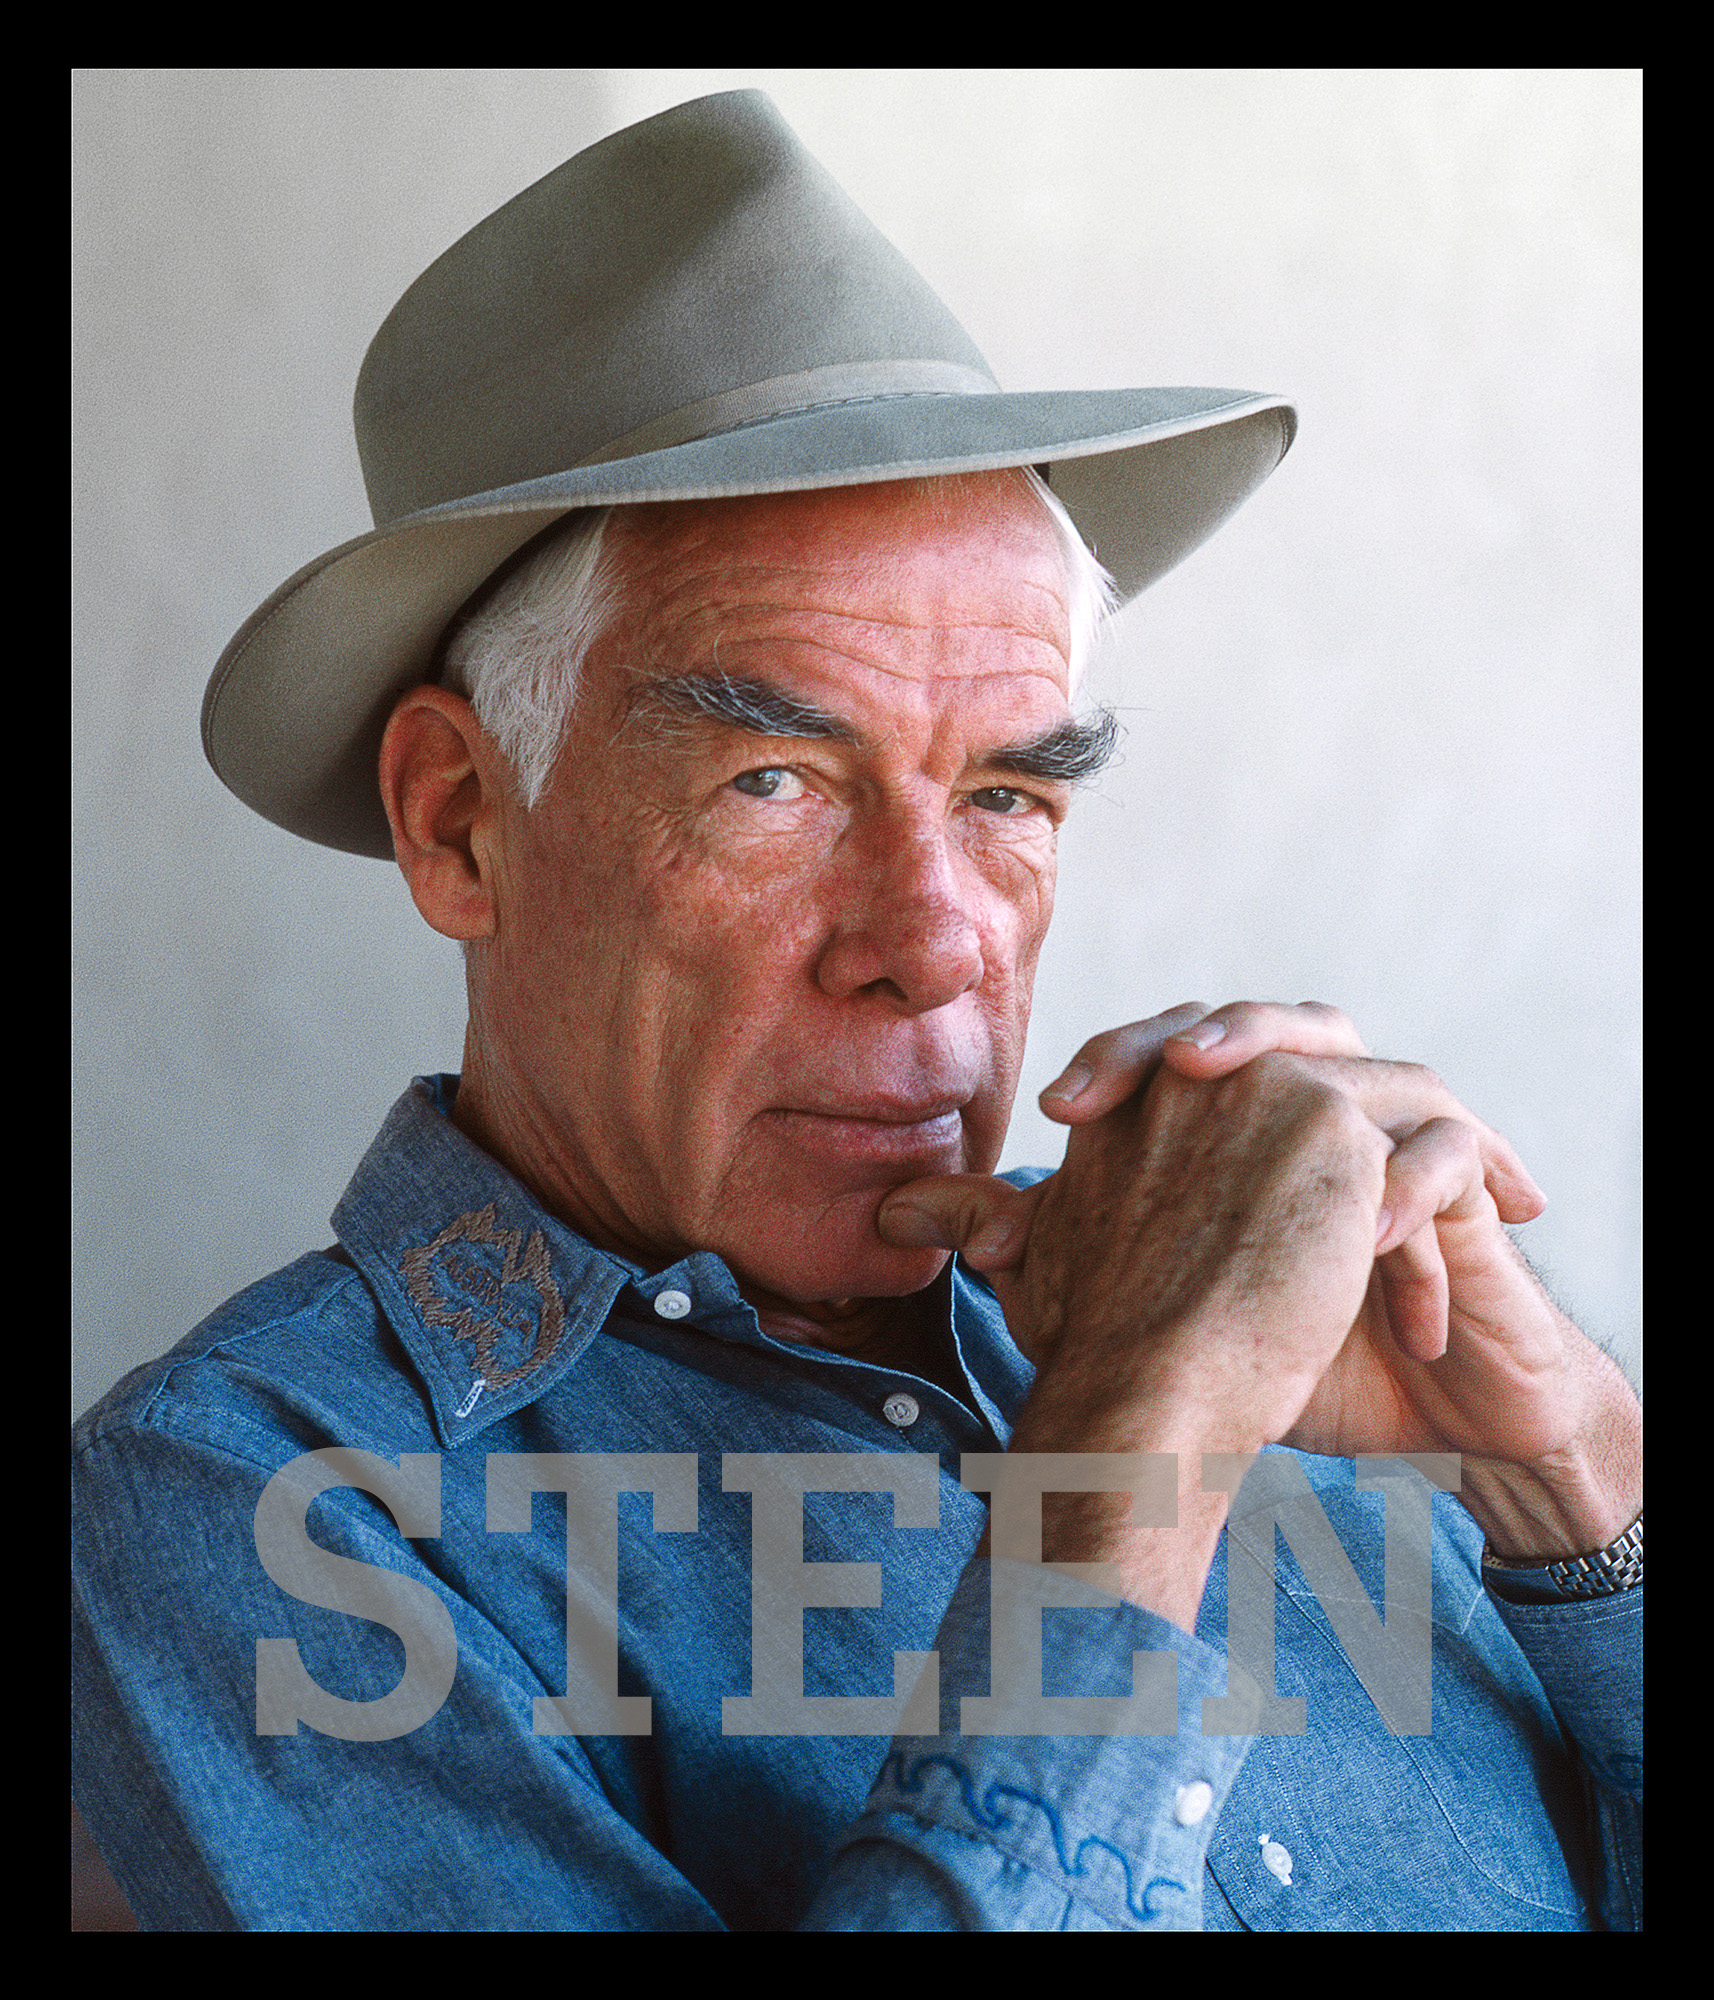 A fine art colour photograph of Lee Marvin by British Photographer David Steen